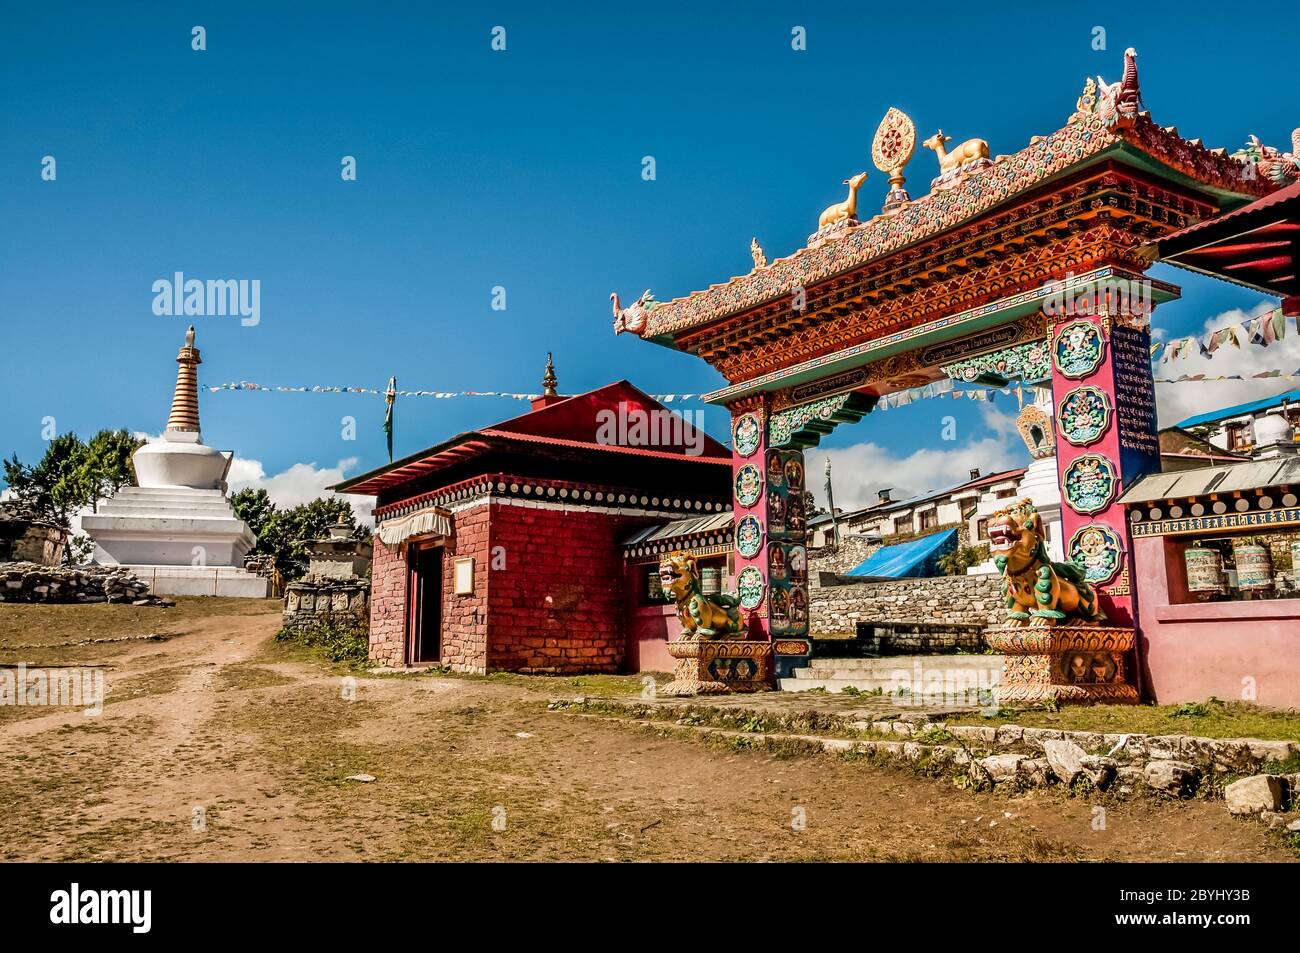 Nepal. Trek to Island Peak. Colourful scenes in and around the Thyangboche Buddhist Monastery with the archway and portal leading to the monastery complex Stock Photo